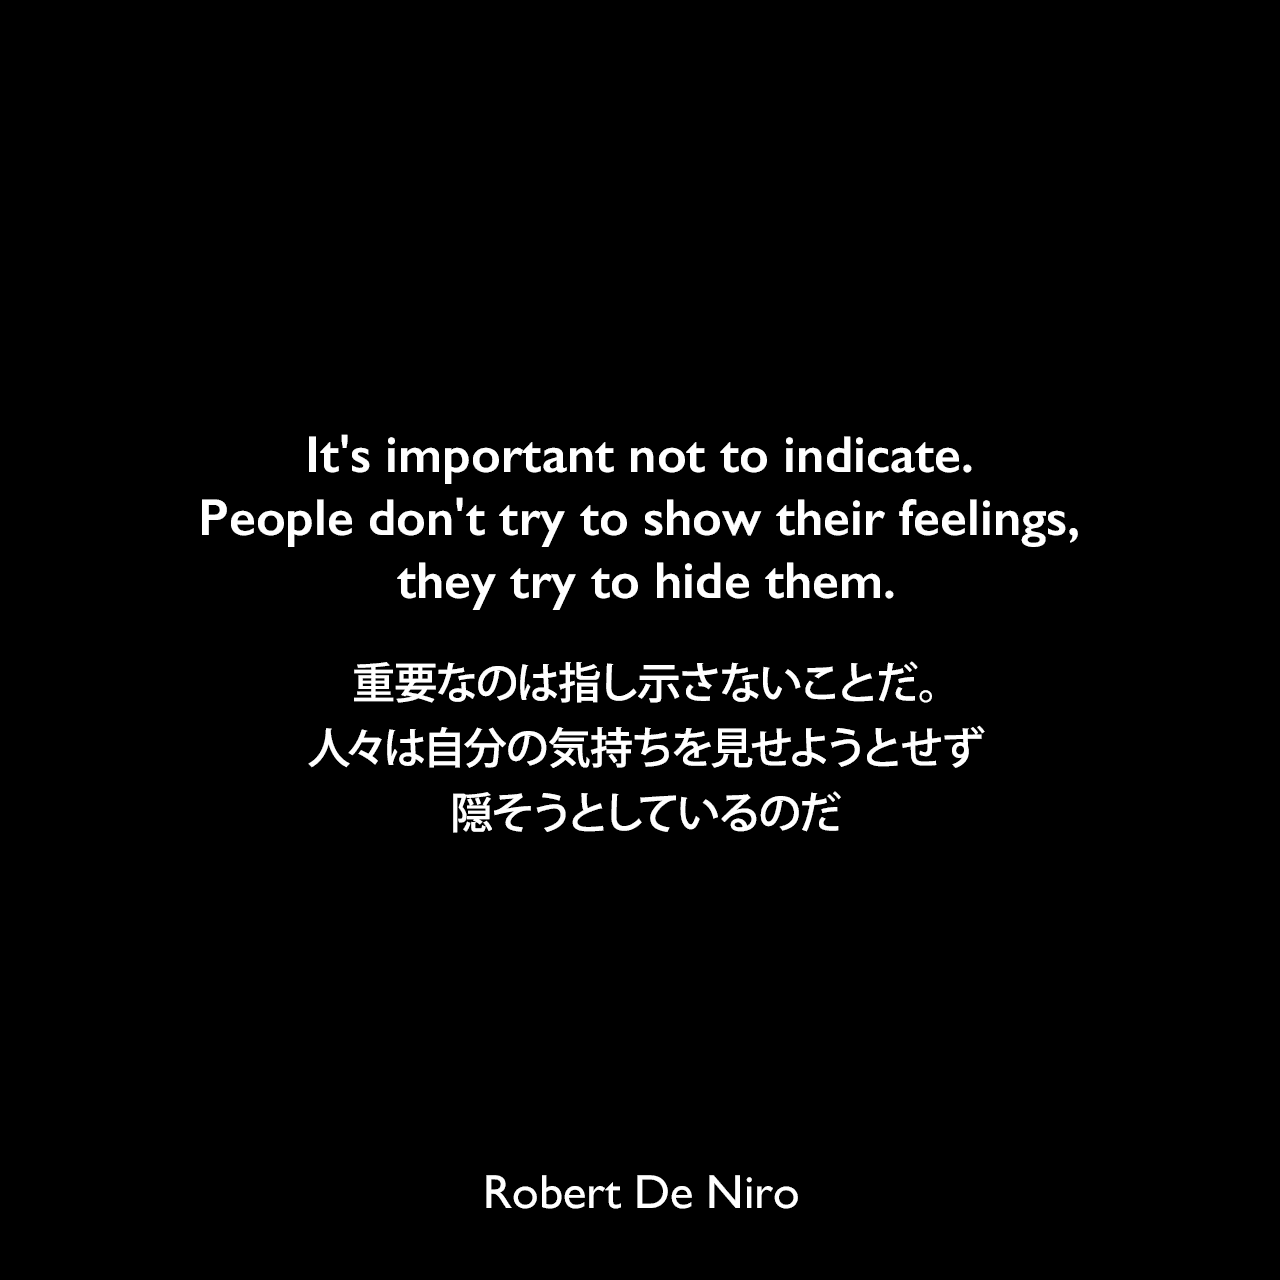 It's important not to indicate. People don't try to show their feelings, they try to hide them.重要なのは指し示さないことだ。人々は自分の気持ちを見せようとせず隠そうとしているのだRobert De Niro